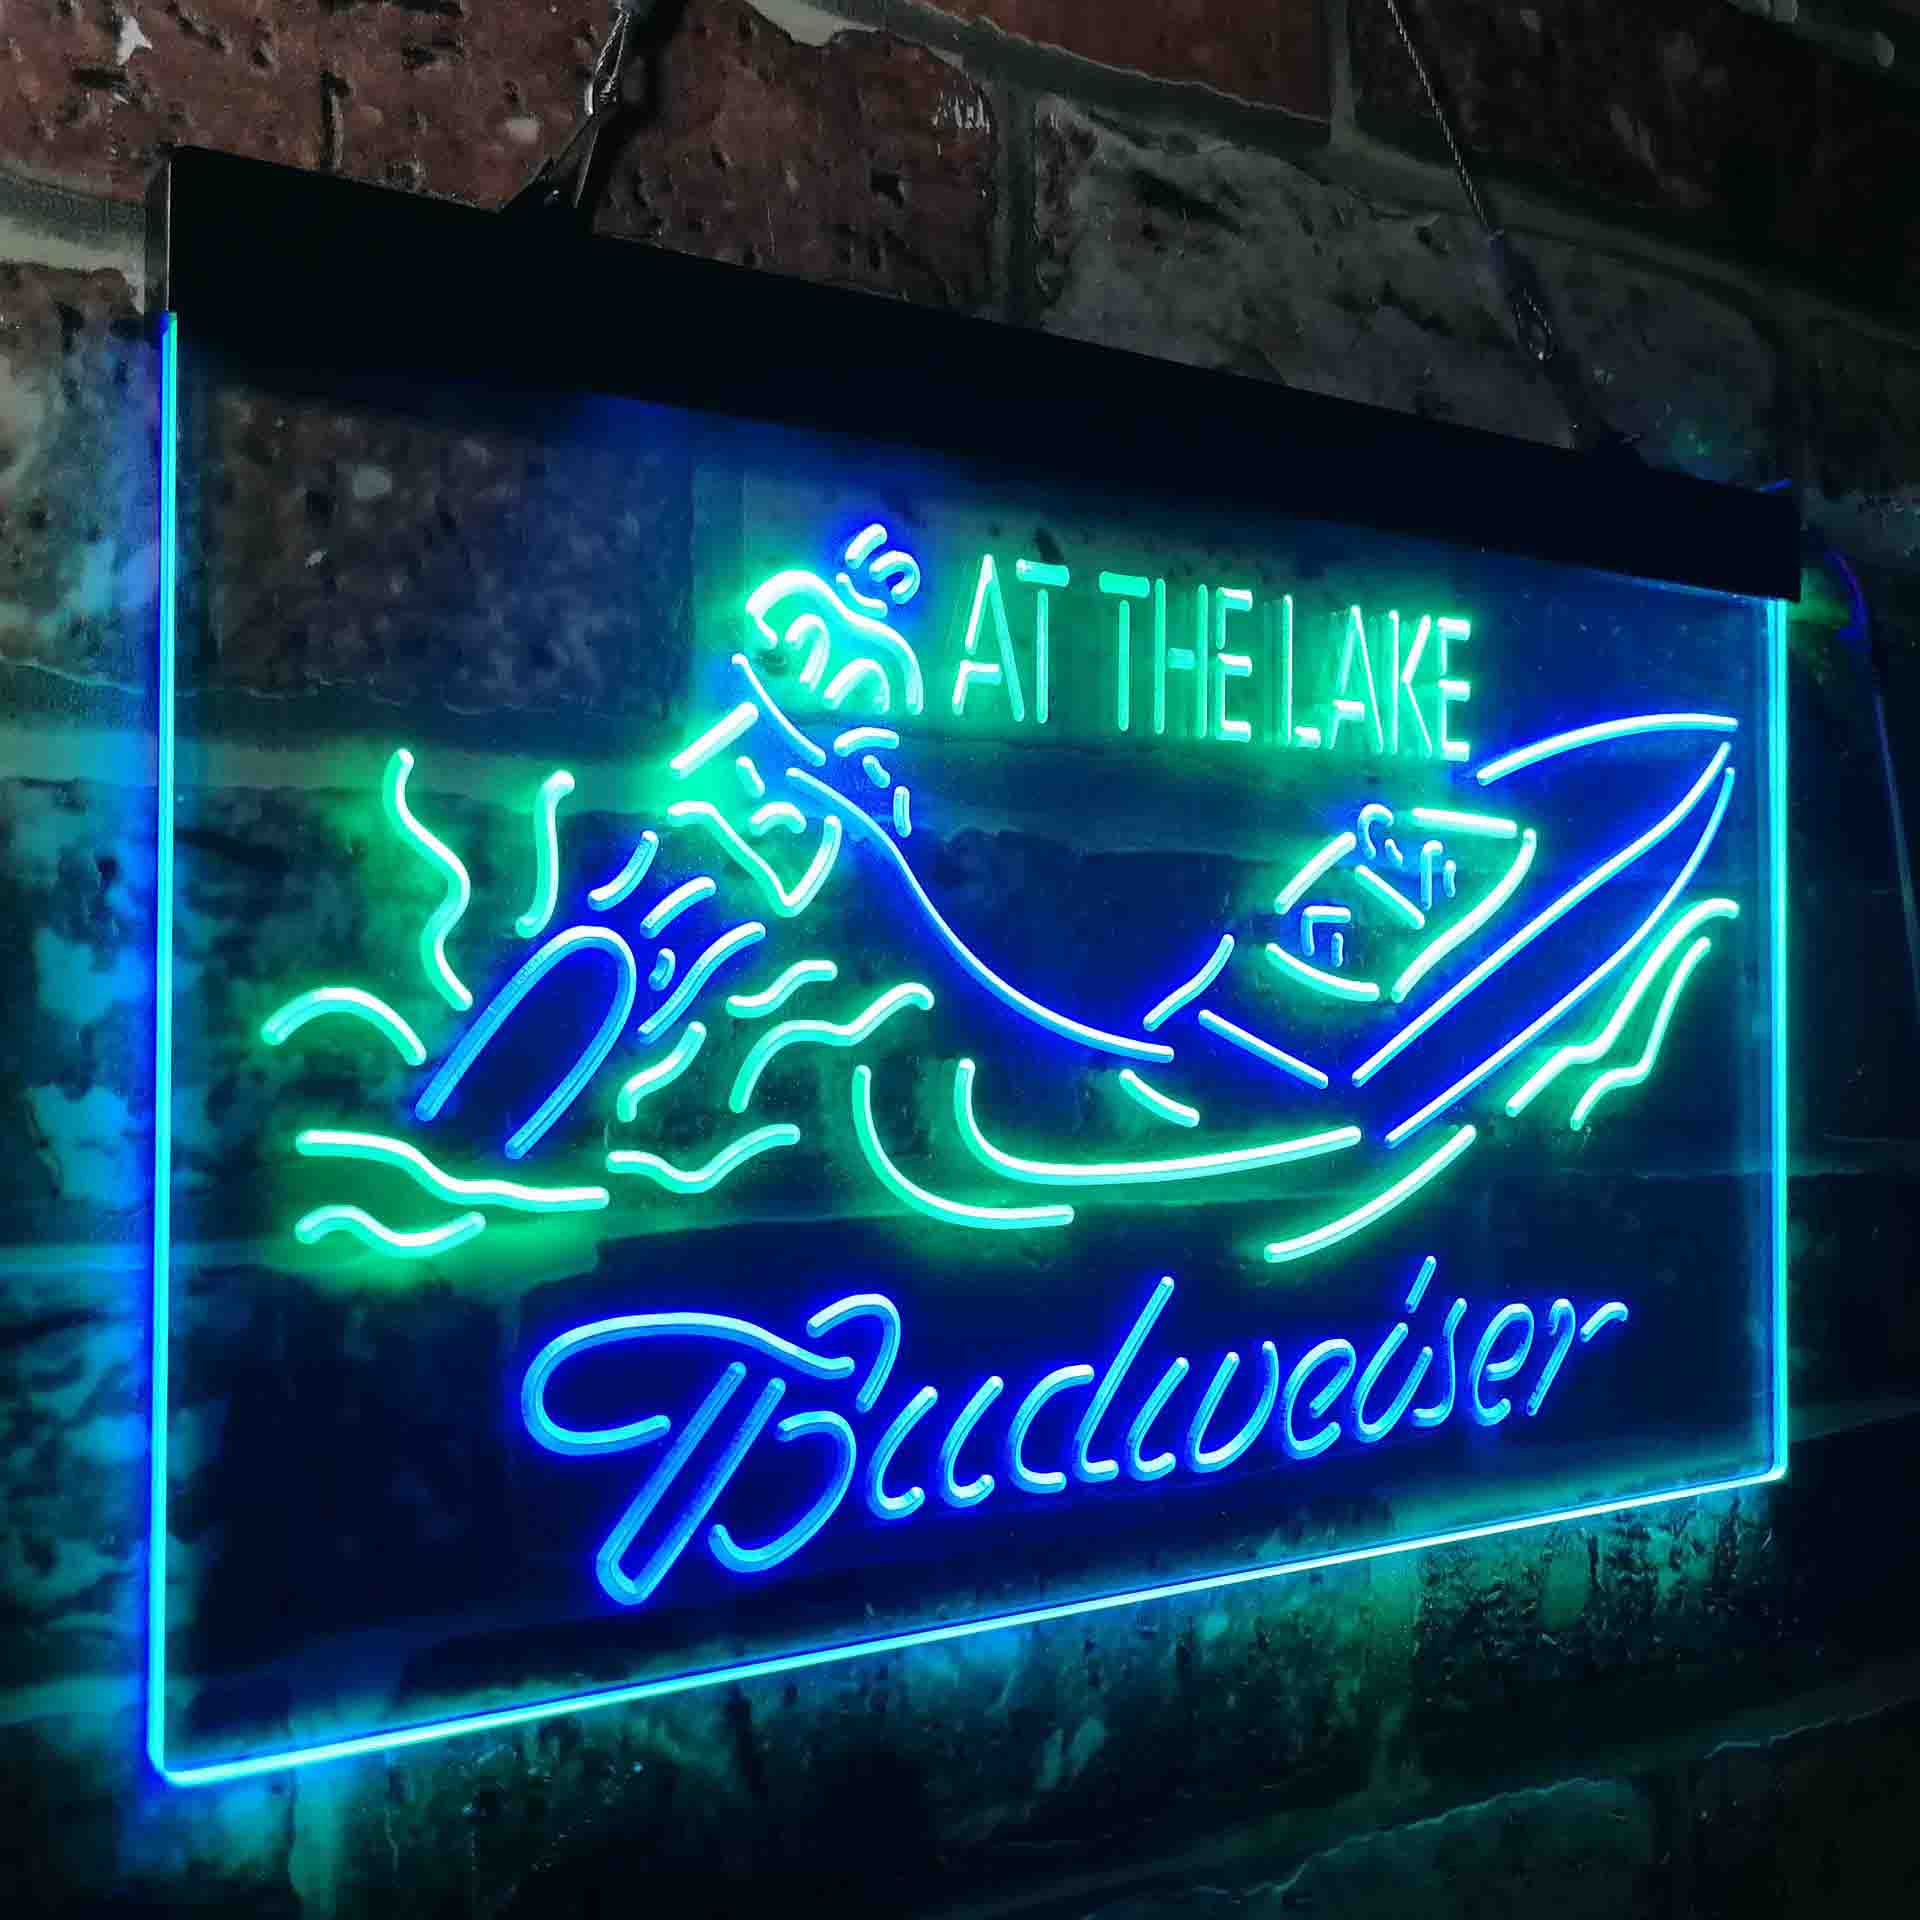 Budweiser At the Lake Cabin LED Neon Sign